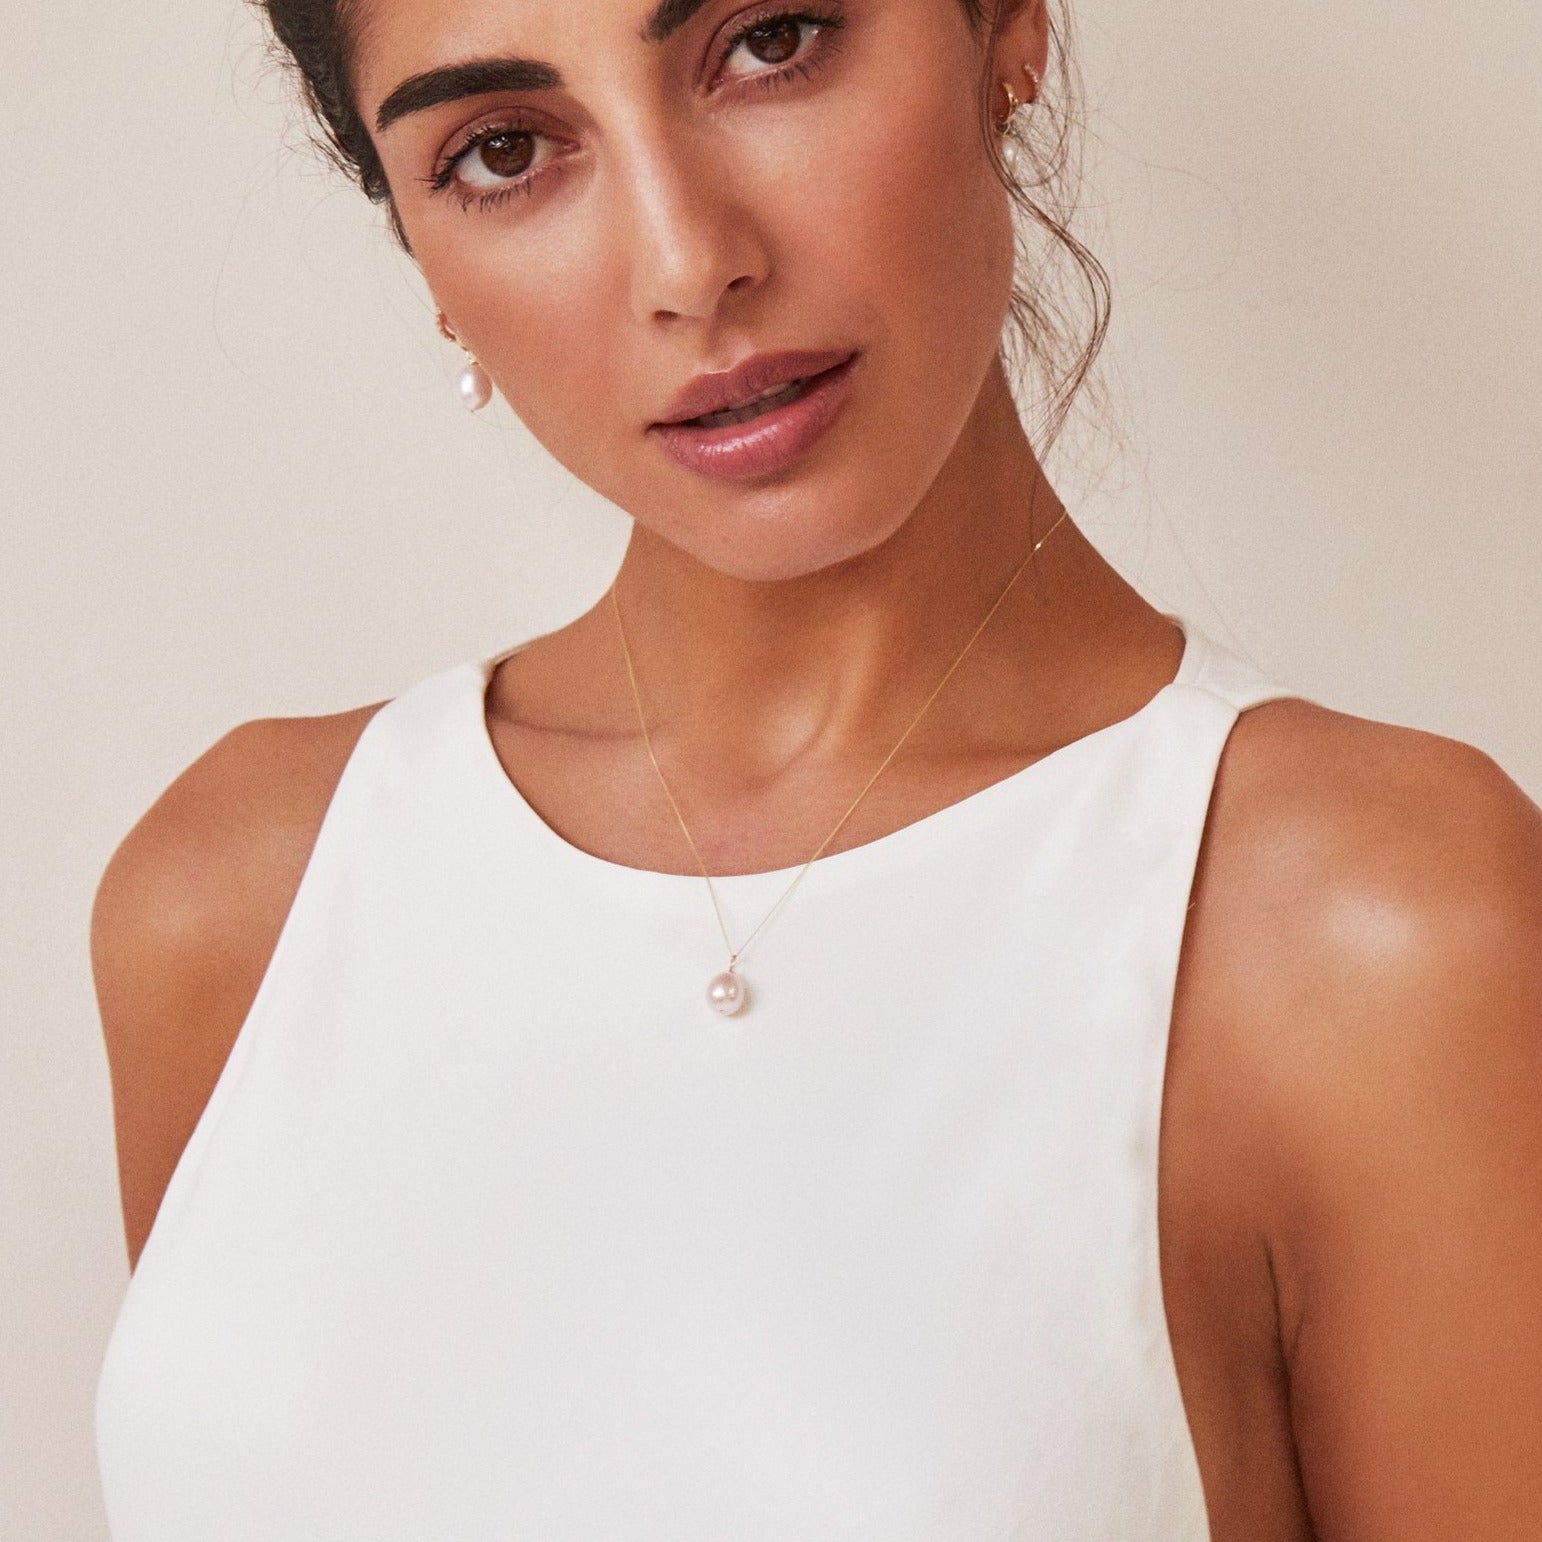 Gold large single pearl necklace around neck with white high neck top on a brunette woman wearing gold plain huggie pearl drop hoop earrings in her ears